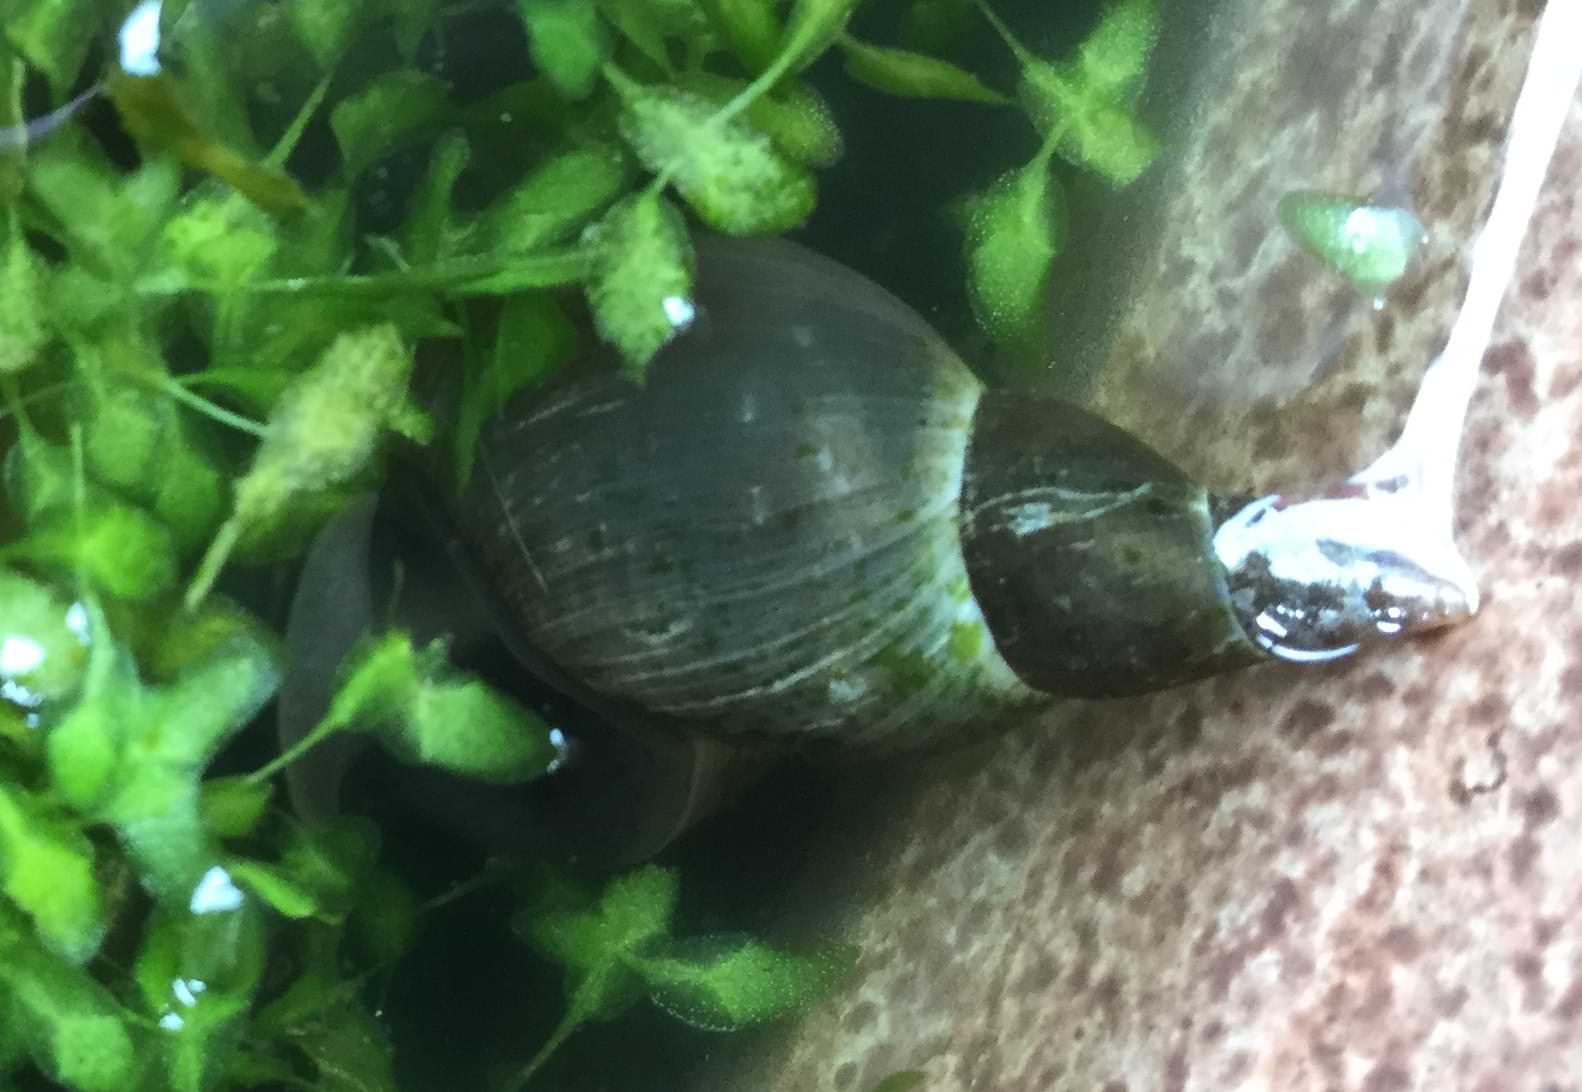 Photo of a snail's shell poking out of the water. The shell is light-grey in colour and is a long spiral shape.